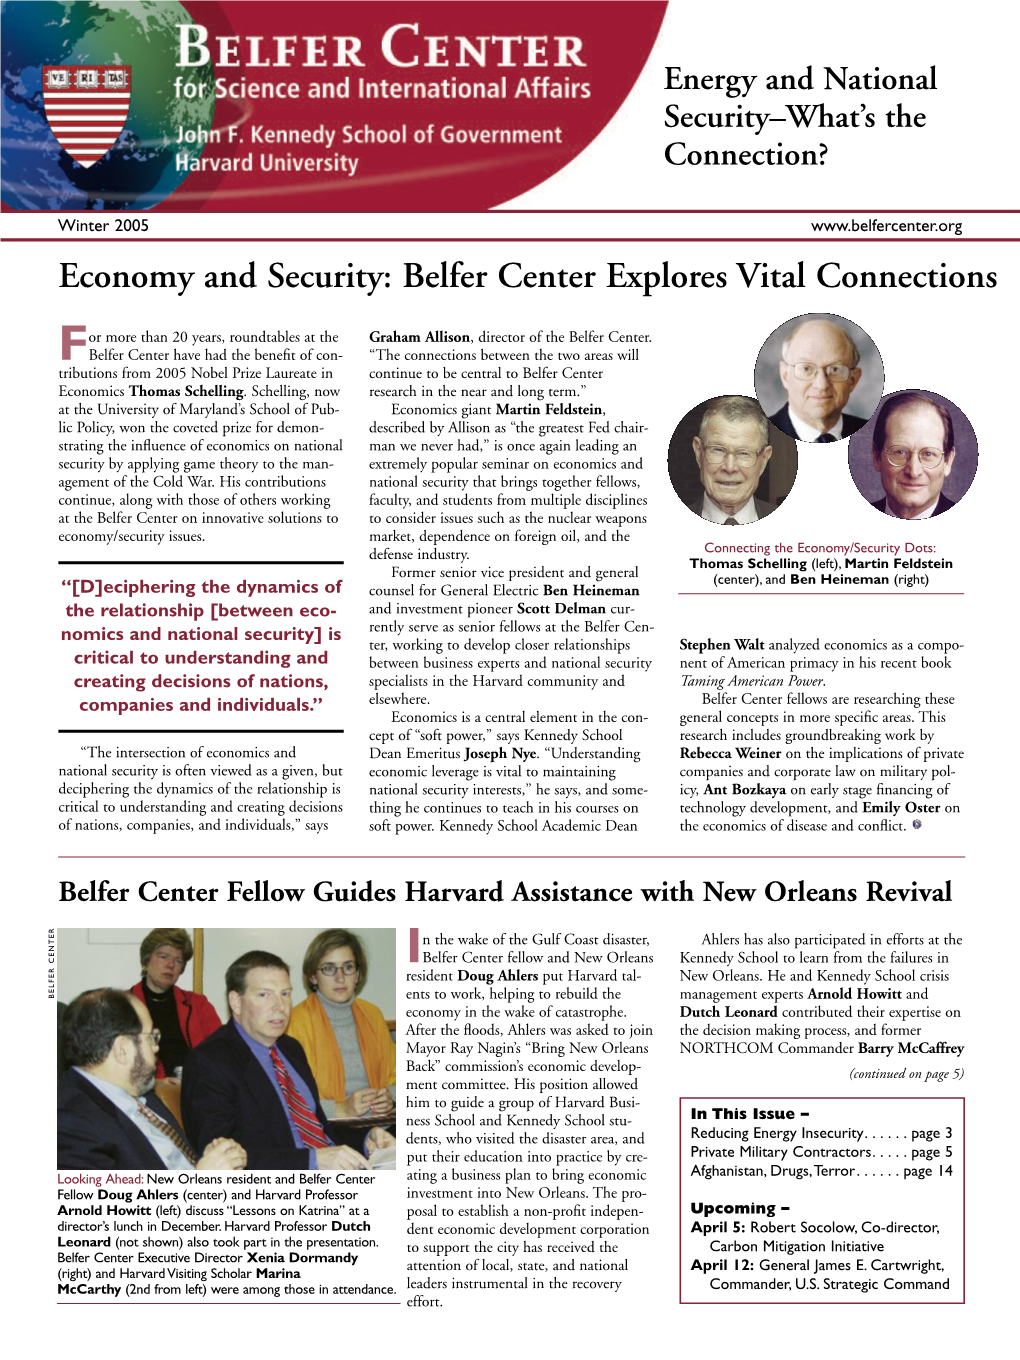 Economy and Security: Belfer Center Explores Vital Connections